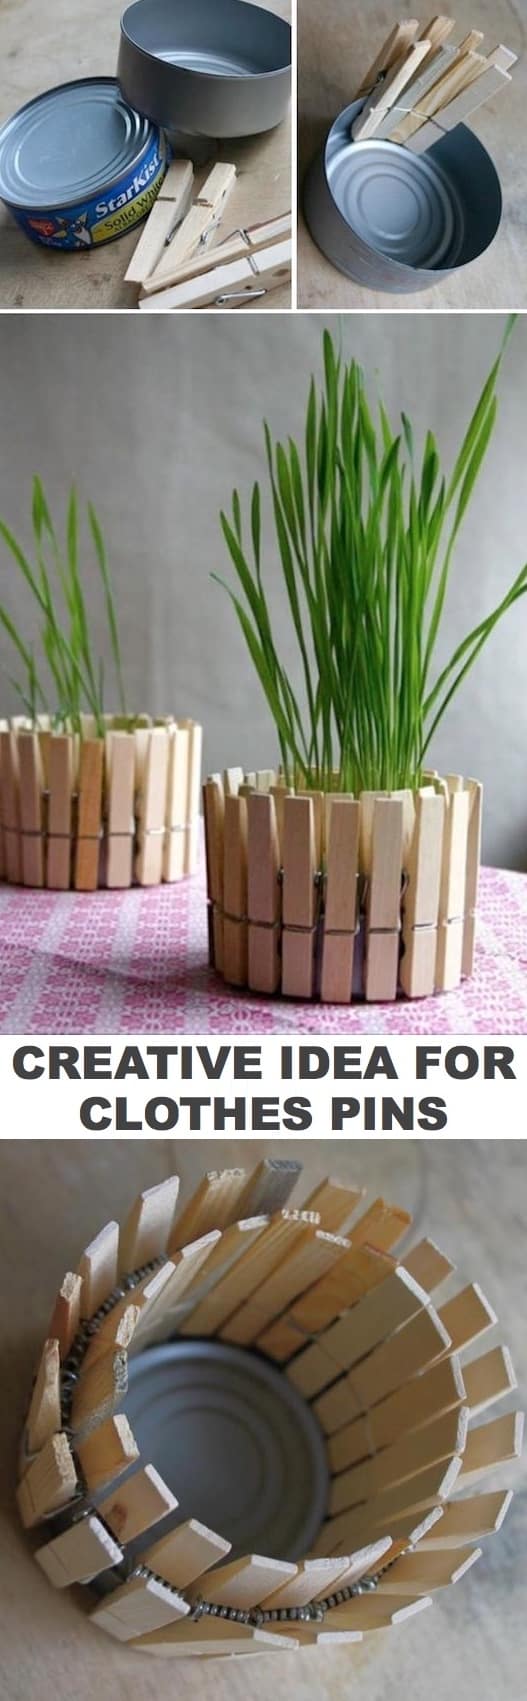 Cheap and easy project idea using clothes pins! -- Easy DIY craft ideas for adults for the home, for fun, for gifts, to sell and more! Some of these would be perfect for Christmas or other holidays. A lot of awesome projects here! Listotic.com